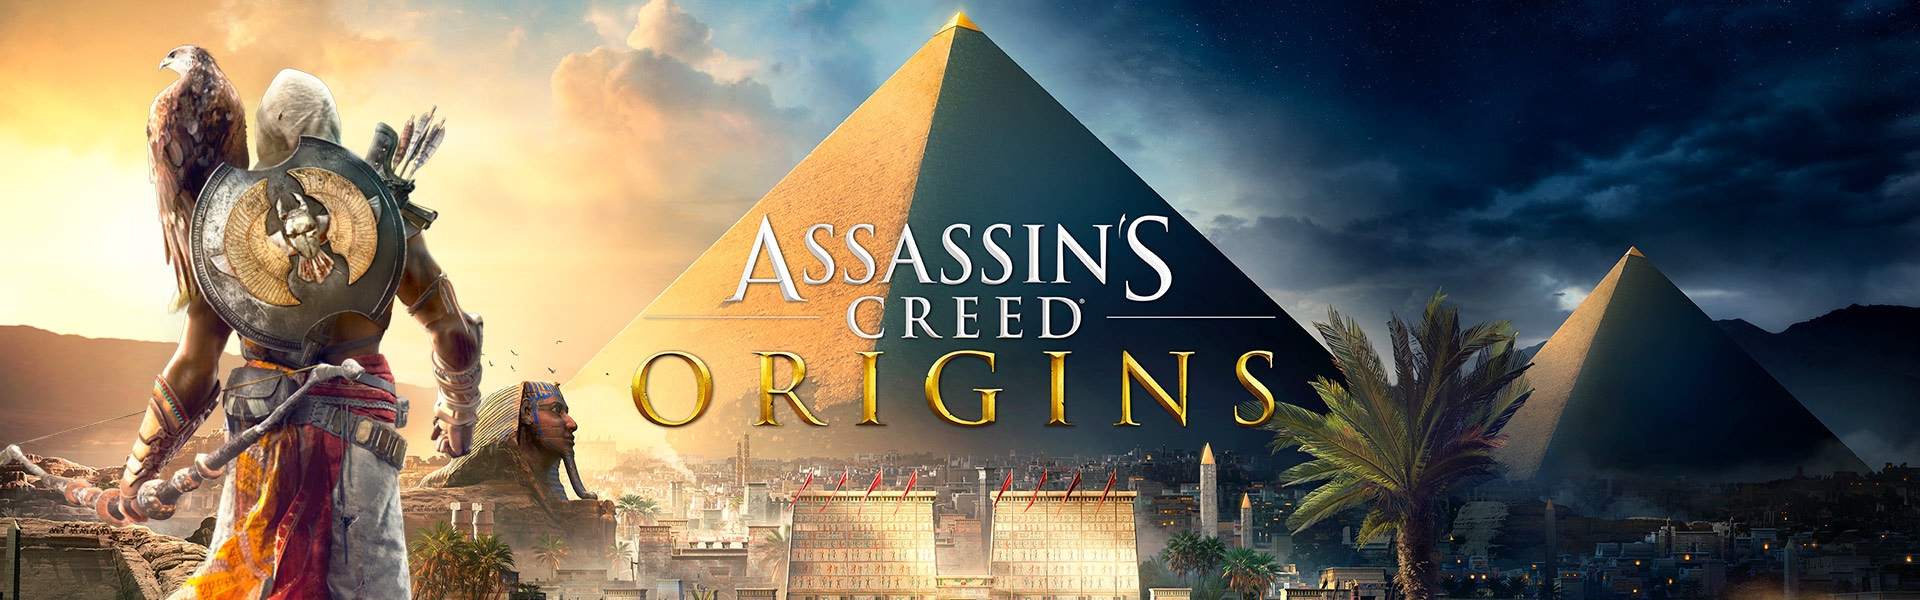 Assassin’s Creed Origins – Q and A with Ashraf Ismail about E3 2017 Demo | DeviceDaily.com